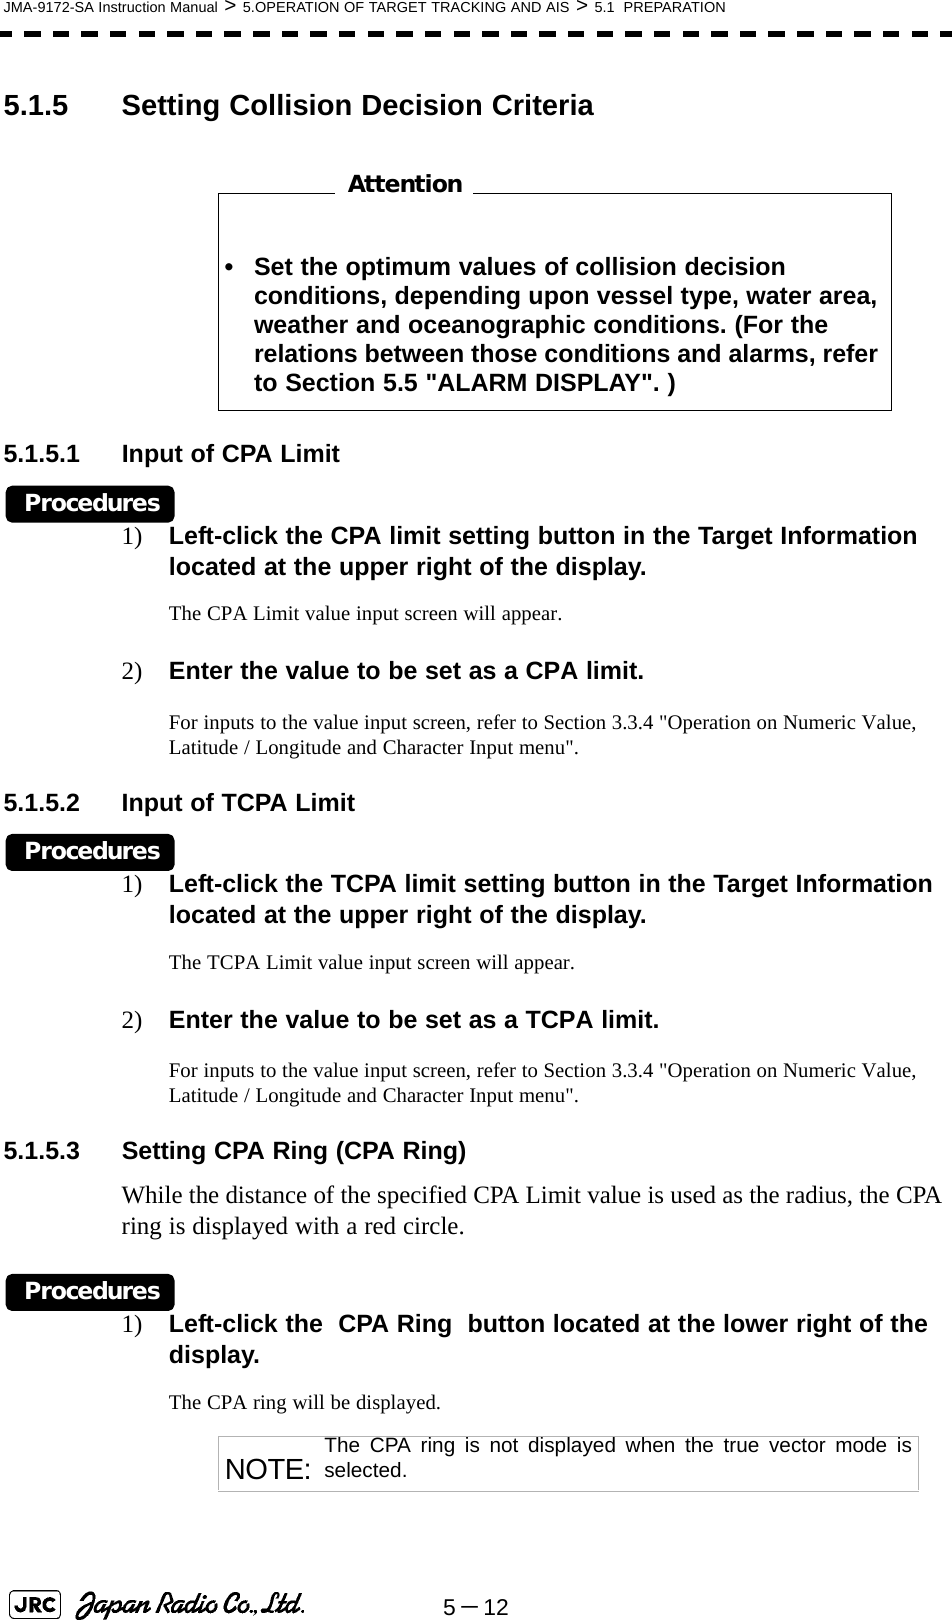 5－12JMA-9172-SA Instruction Manual &gt; 5.OPERATION OF TARGET TRACKING AND AIS &gt; 5.1  PREPARATION5.1.5 Setting Collision Decision Criteria　　　　　　　　5.1.5.1 Input of CPA LimitProcedures1) Left-click the CPA limit setting button in the Target Information located at the upper right of the display.The CPA Limit value input screen will appear.2) Enter the value to be set as a CPA limit.For inputs to the value input screen, refer to Section 3.3.4 &quot;Operation on Numeric Value, Latitude / Longitude and Character Input menu&quot;.5.1.5.2 Input of TCPA LimitProcedures1) Left-click the TCPA limit setting button in the Target Information located at the upper right of the display.The TCPA Limit value input screen will appear.2) Enter the value to be set as a TCPA limit.For inputs to the value input screen, refer to Section 3.3.4 &quot;Operation on Numeric Value, Latitude / Longitude and Character Input menu&quot;.5.1.5.3 Setting CPA Ring (CPA Ring)While the distance of the specified CPA Limit value is used as the radius, the CPA ring is displayed with a red circle.Procedures1) Left-click the  CPA Ring  button located at the lower right of the display.The CPA ring will be displayed. • Set the optimum values of collision decision conditions, depending upon vessel type, water area, weather and oceanographic conditions. (For the relations between those conditions and alarms, refer to Section 5.5 &quot;ALARM DISPLAY&quot;. )NOTE: The CPA ring is not displayed when the true vector mode isselected.Attention